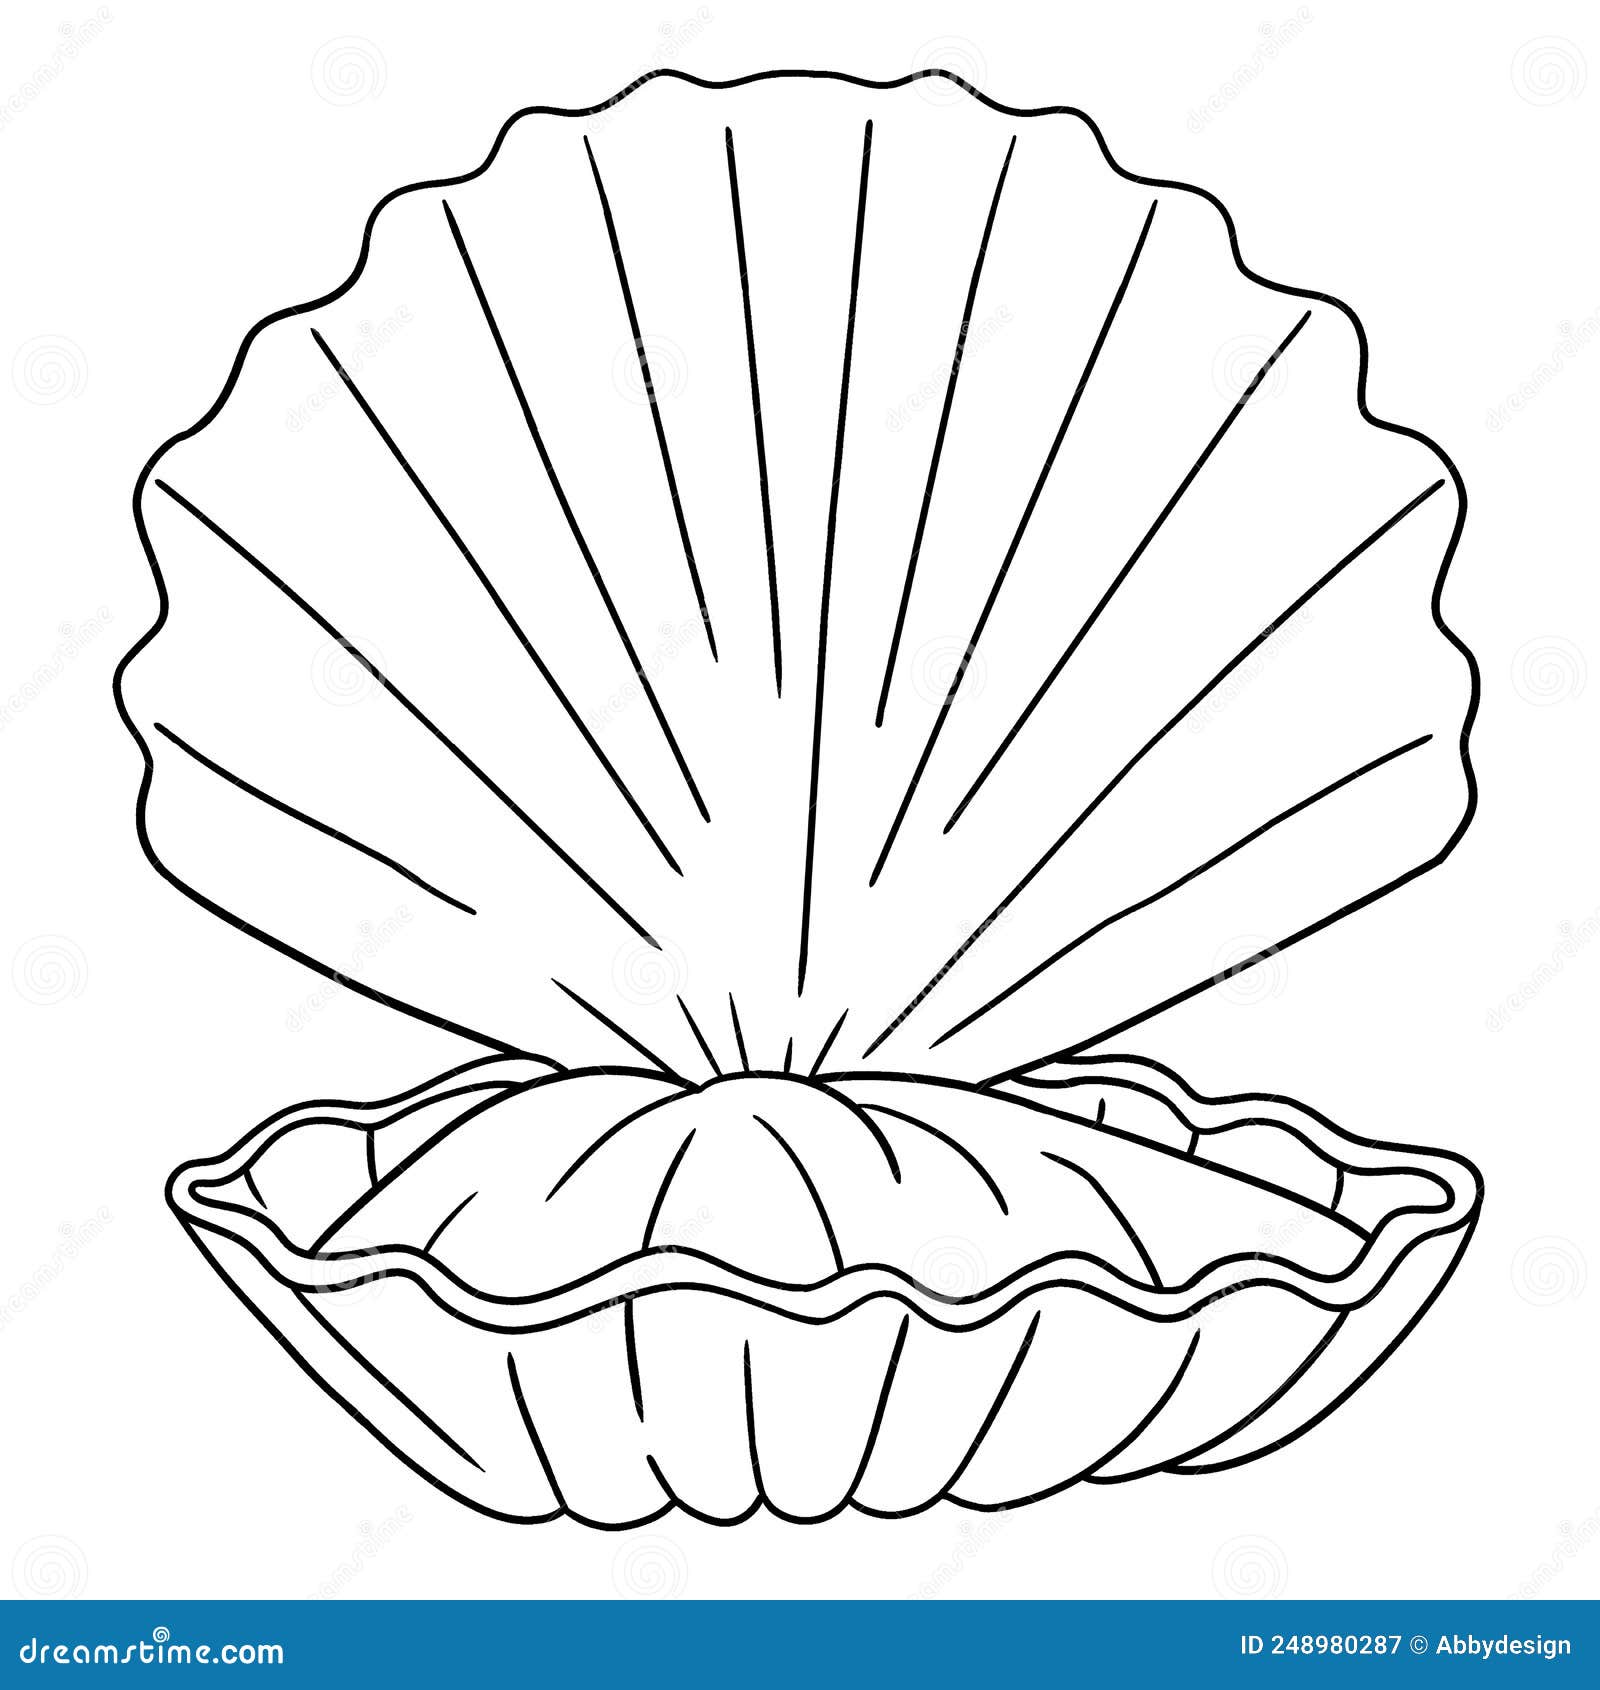 Clamp Shell Isolated Coloring Page for Kids Stock Vector - Illustration ...